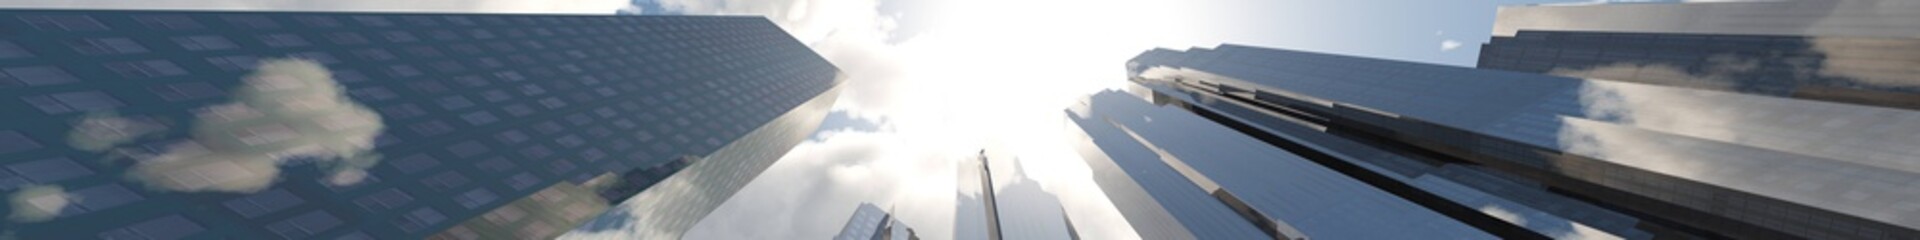 panorama of skyscrapers of high-rise buildings against the sky with clouds,
3D rendering
